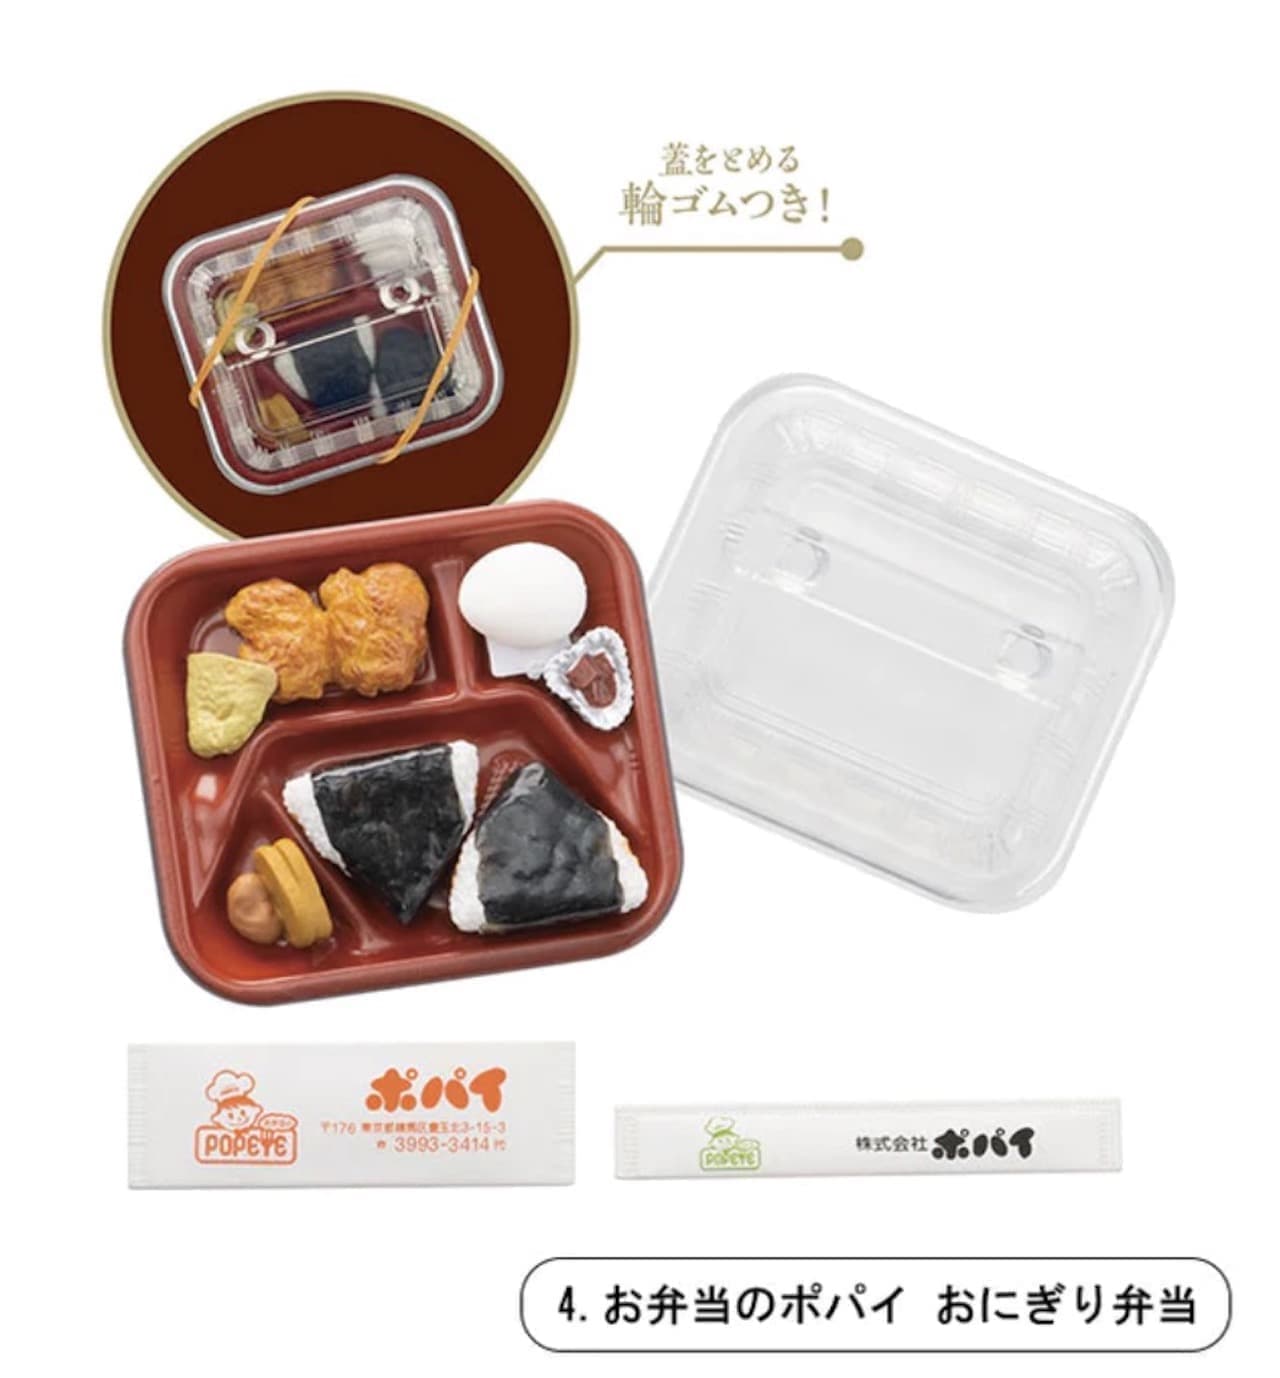 The Second Miniature Collection of Backstage Lunchboxes" from Ken Elephant. 